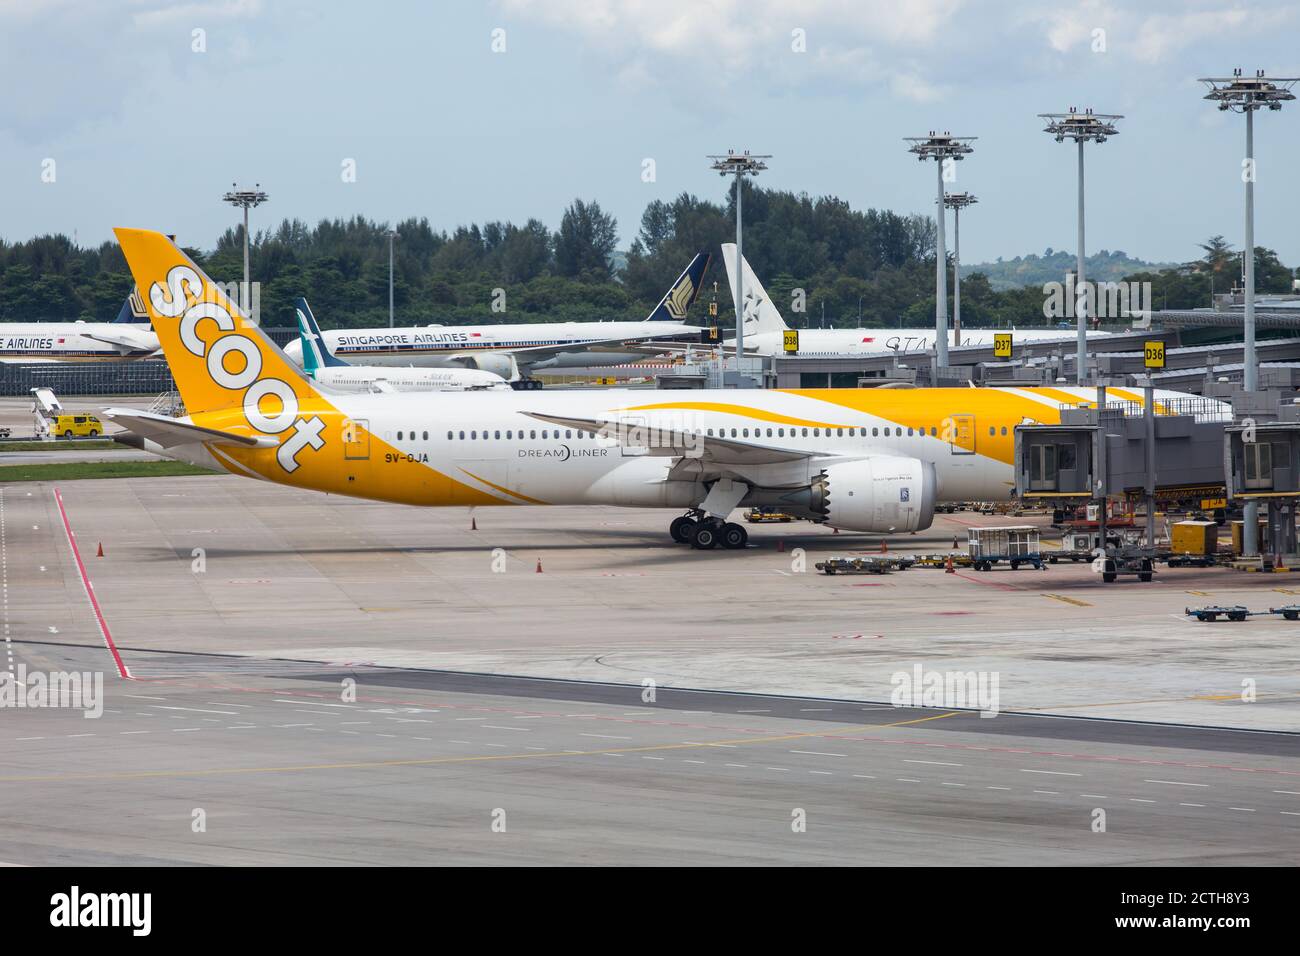 Like many other airline brands, Scoot aircraft is grounded as the pandemic continues to hit the airline industry for months. Singapore. Stock Photo